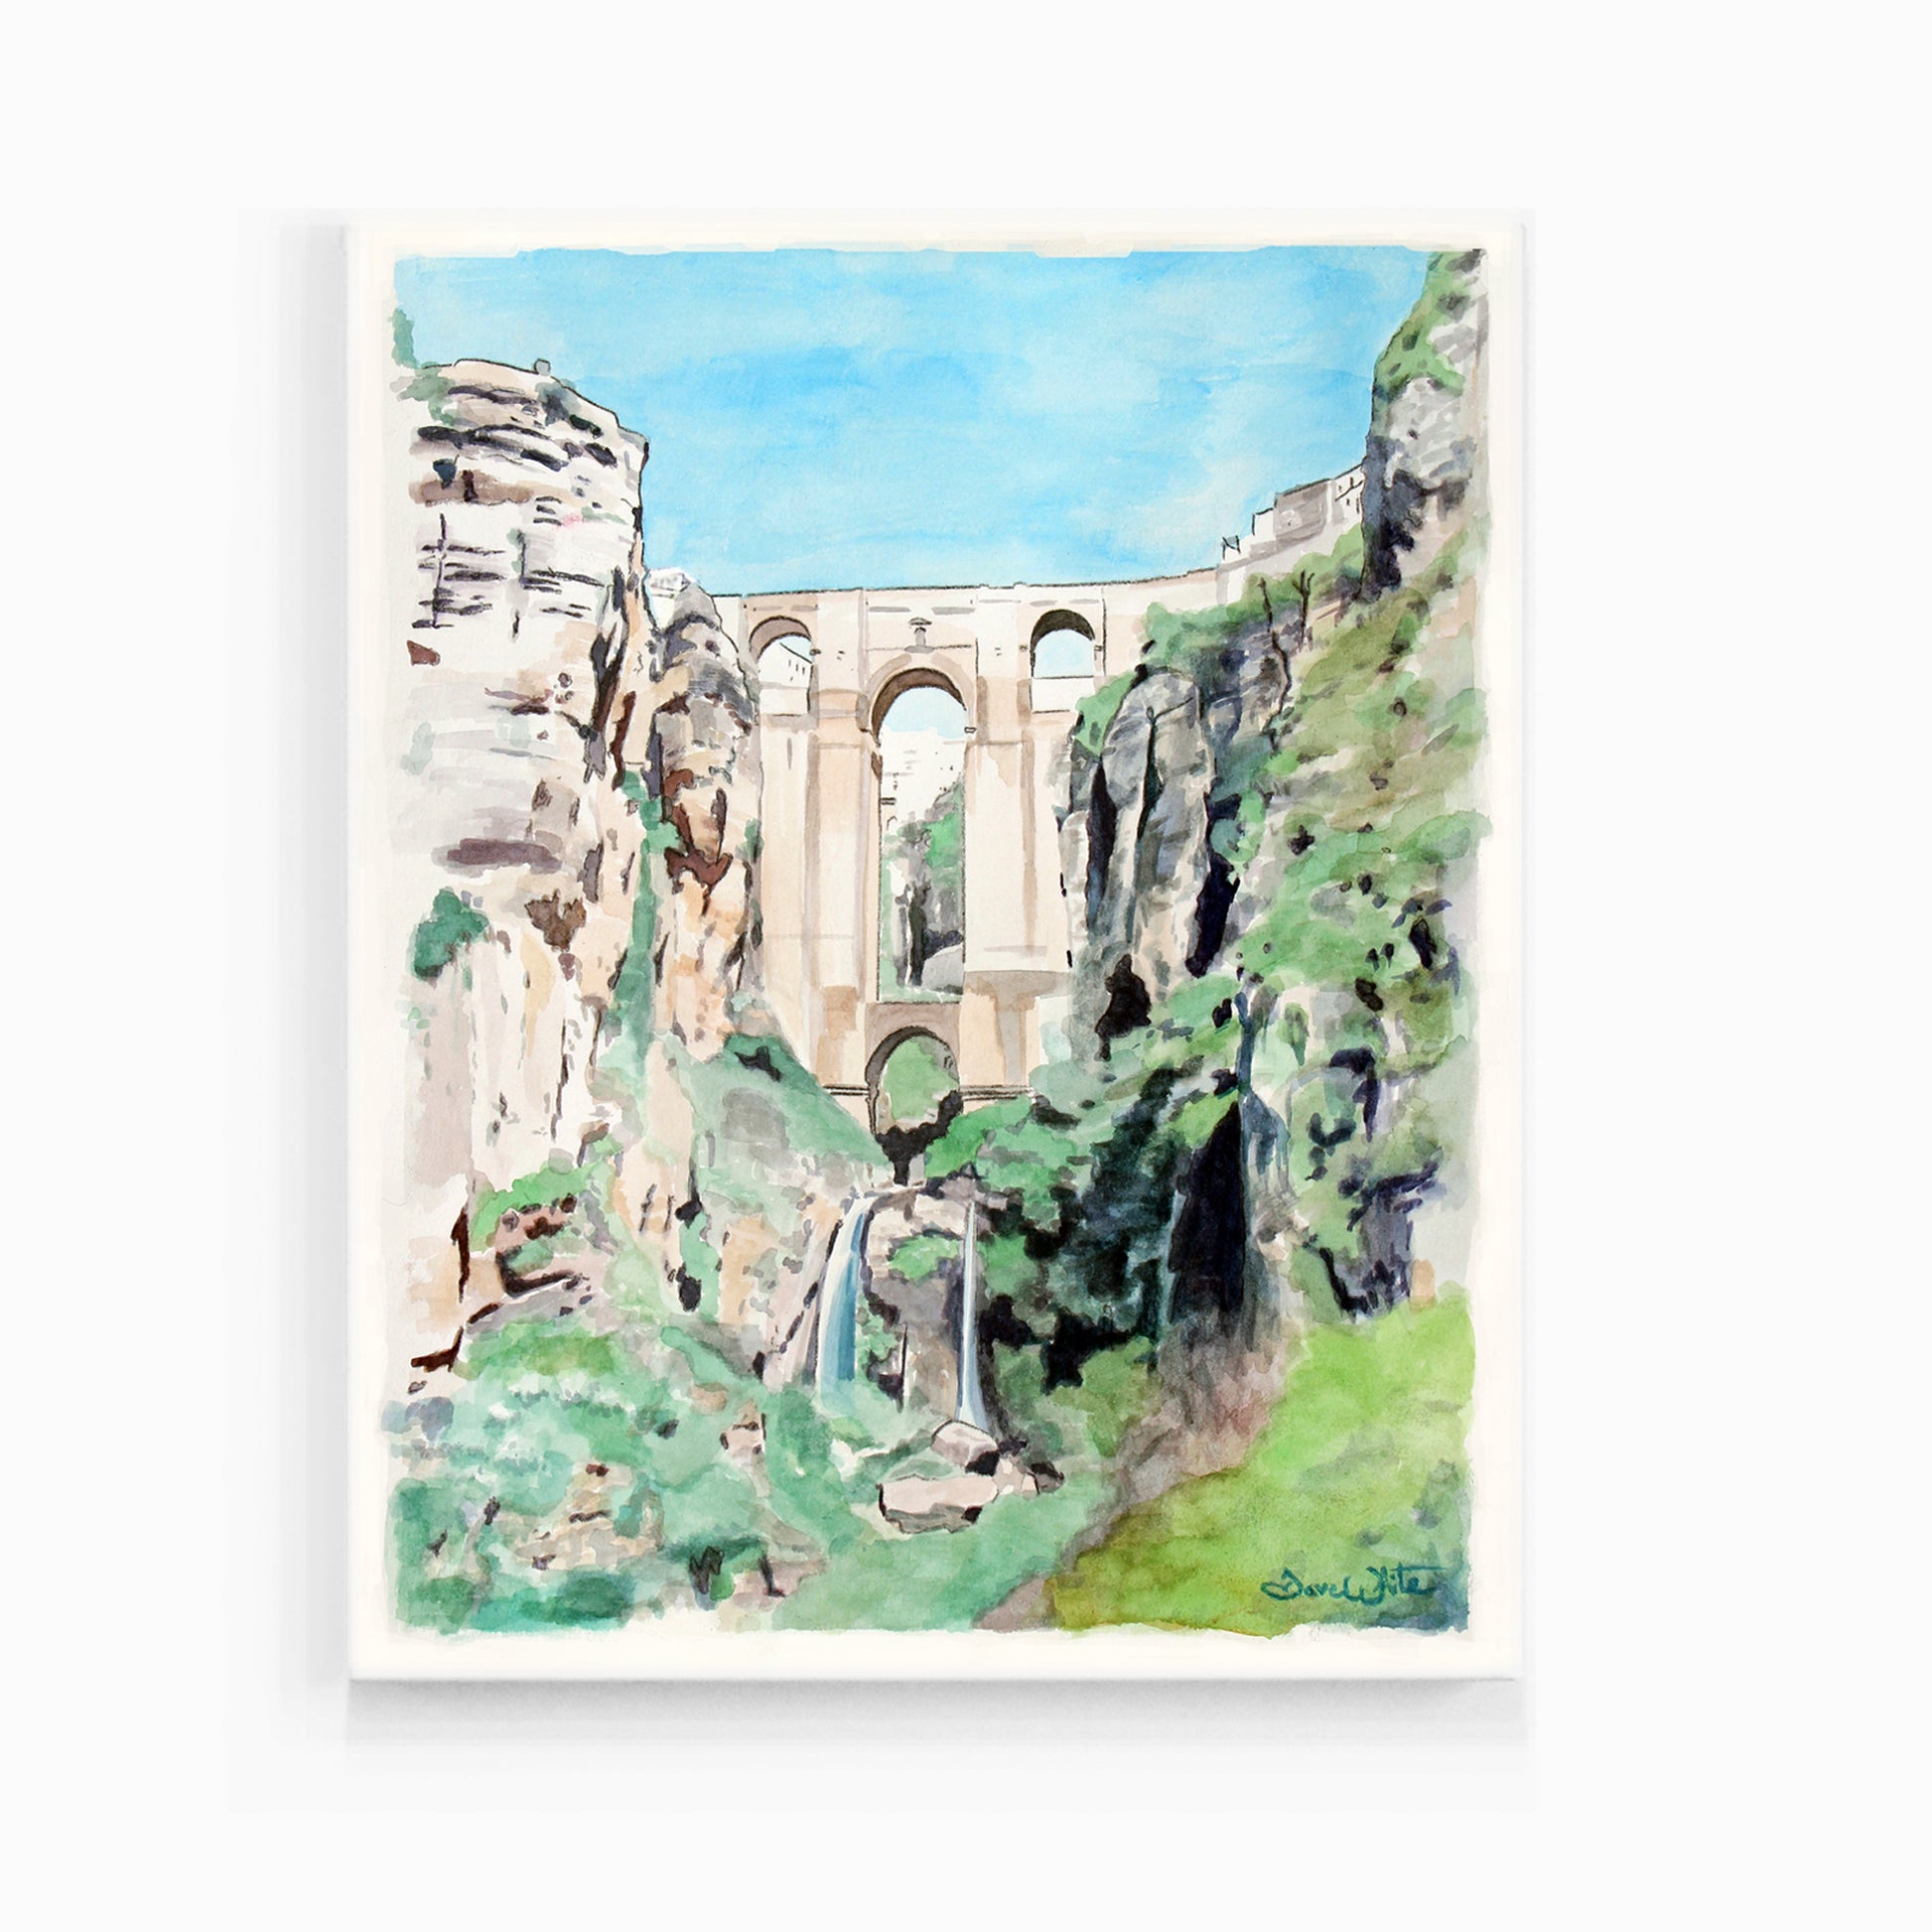 Ronda Spain Watercolor Painting Canvas Art Print by Artist Dave White